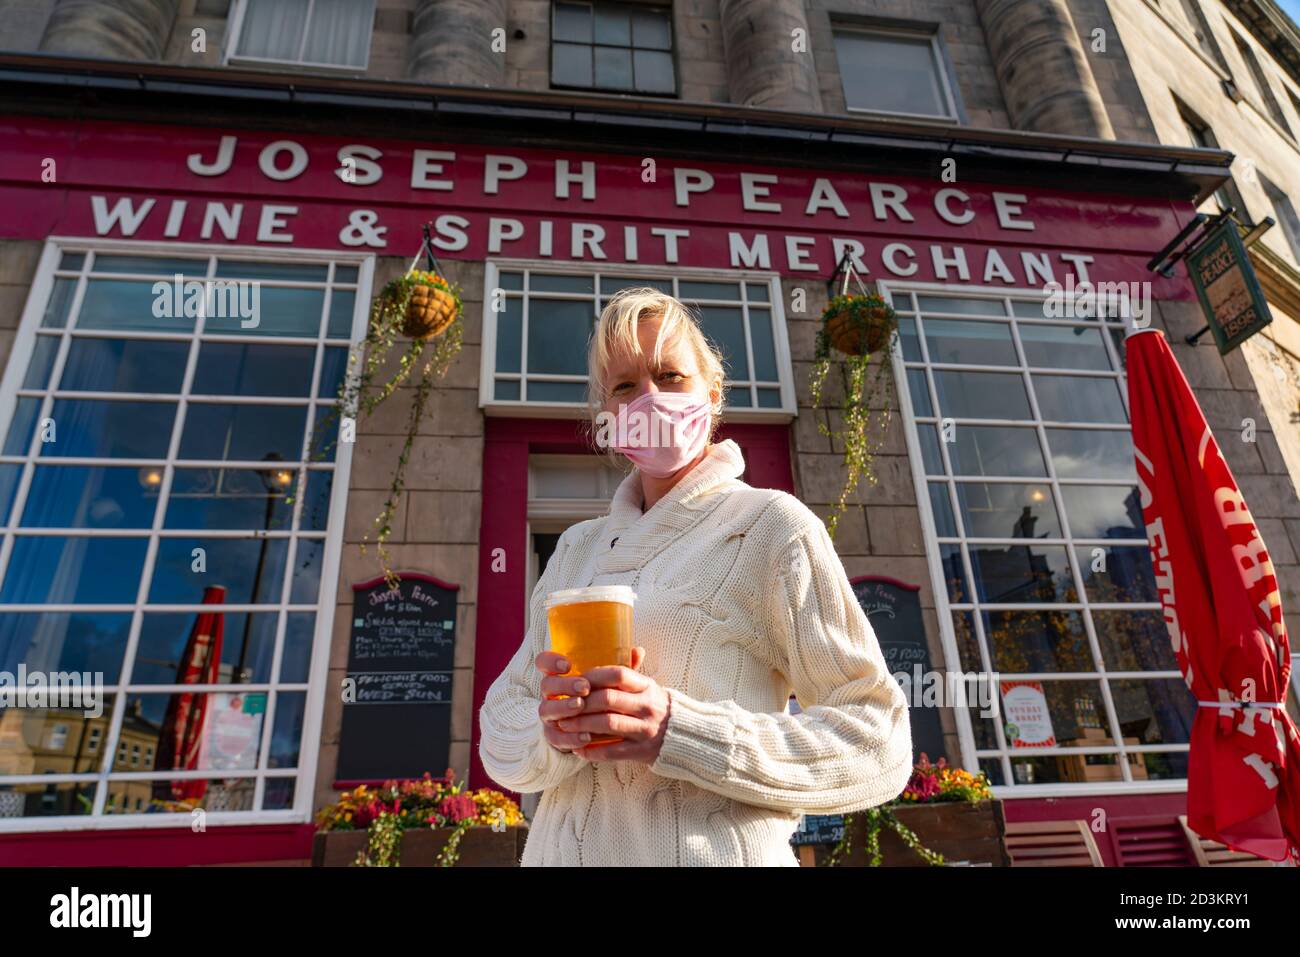 Edinburgh, Scotland, UK. 8 October 2020. Anna  Christopherson, owner of the Boda Bars, stands in front of her pub, Joseph Pearce on Elm Row. Ms Christopherson is angry and confused about the Scottish Government's plans to close pubs from Friday. She says she is is unable to make any plans, for either food and beverage or staffing,  to allow her business to continue when cannot understand the rules being issued by the Scottish Government. The confusion is leading to desperation amongst bar owners as they face a very uncertain future, she says. Iain Masterton/Alamy Live News Stock Photo